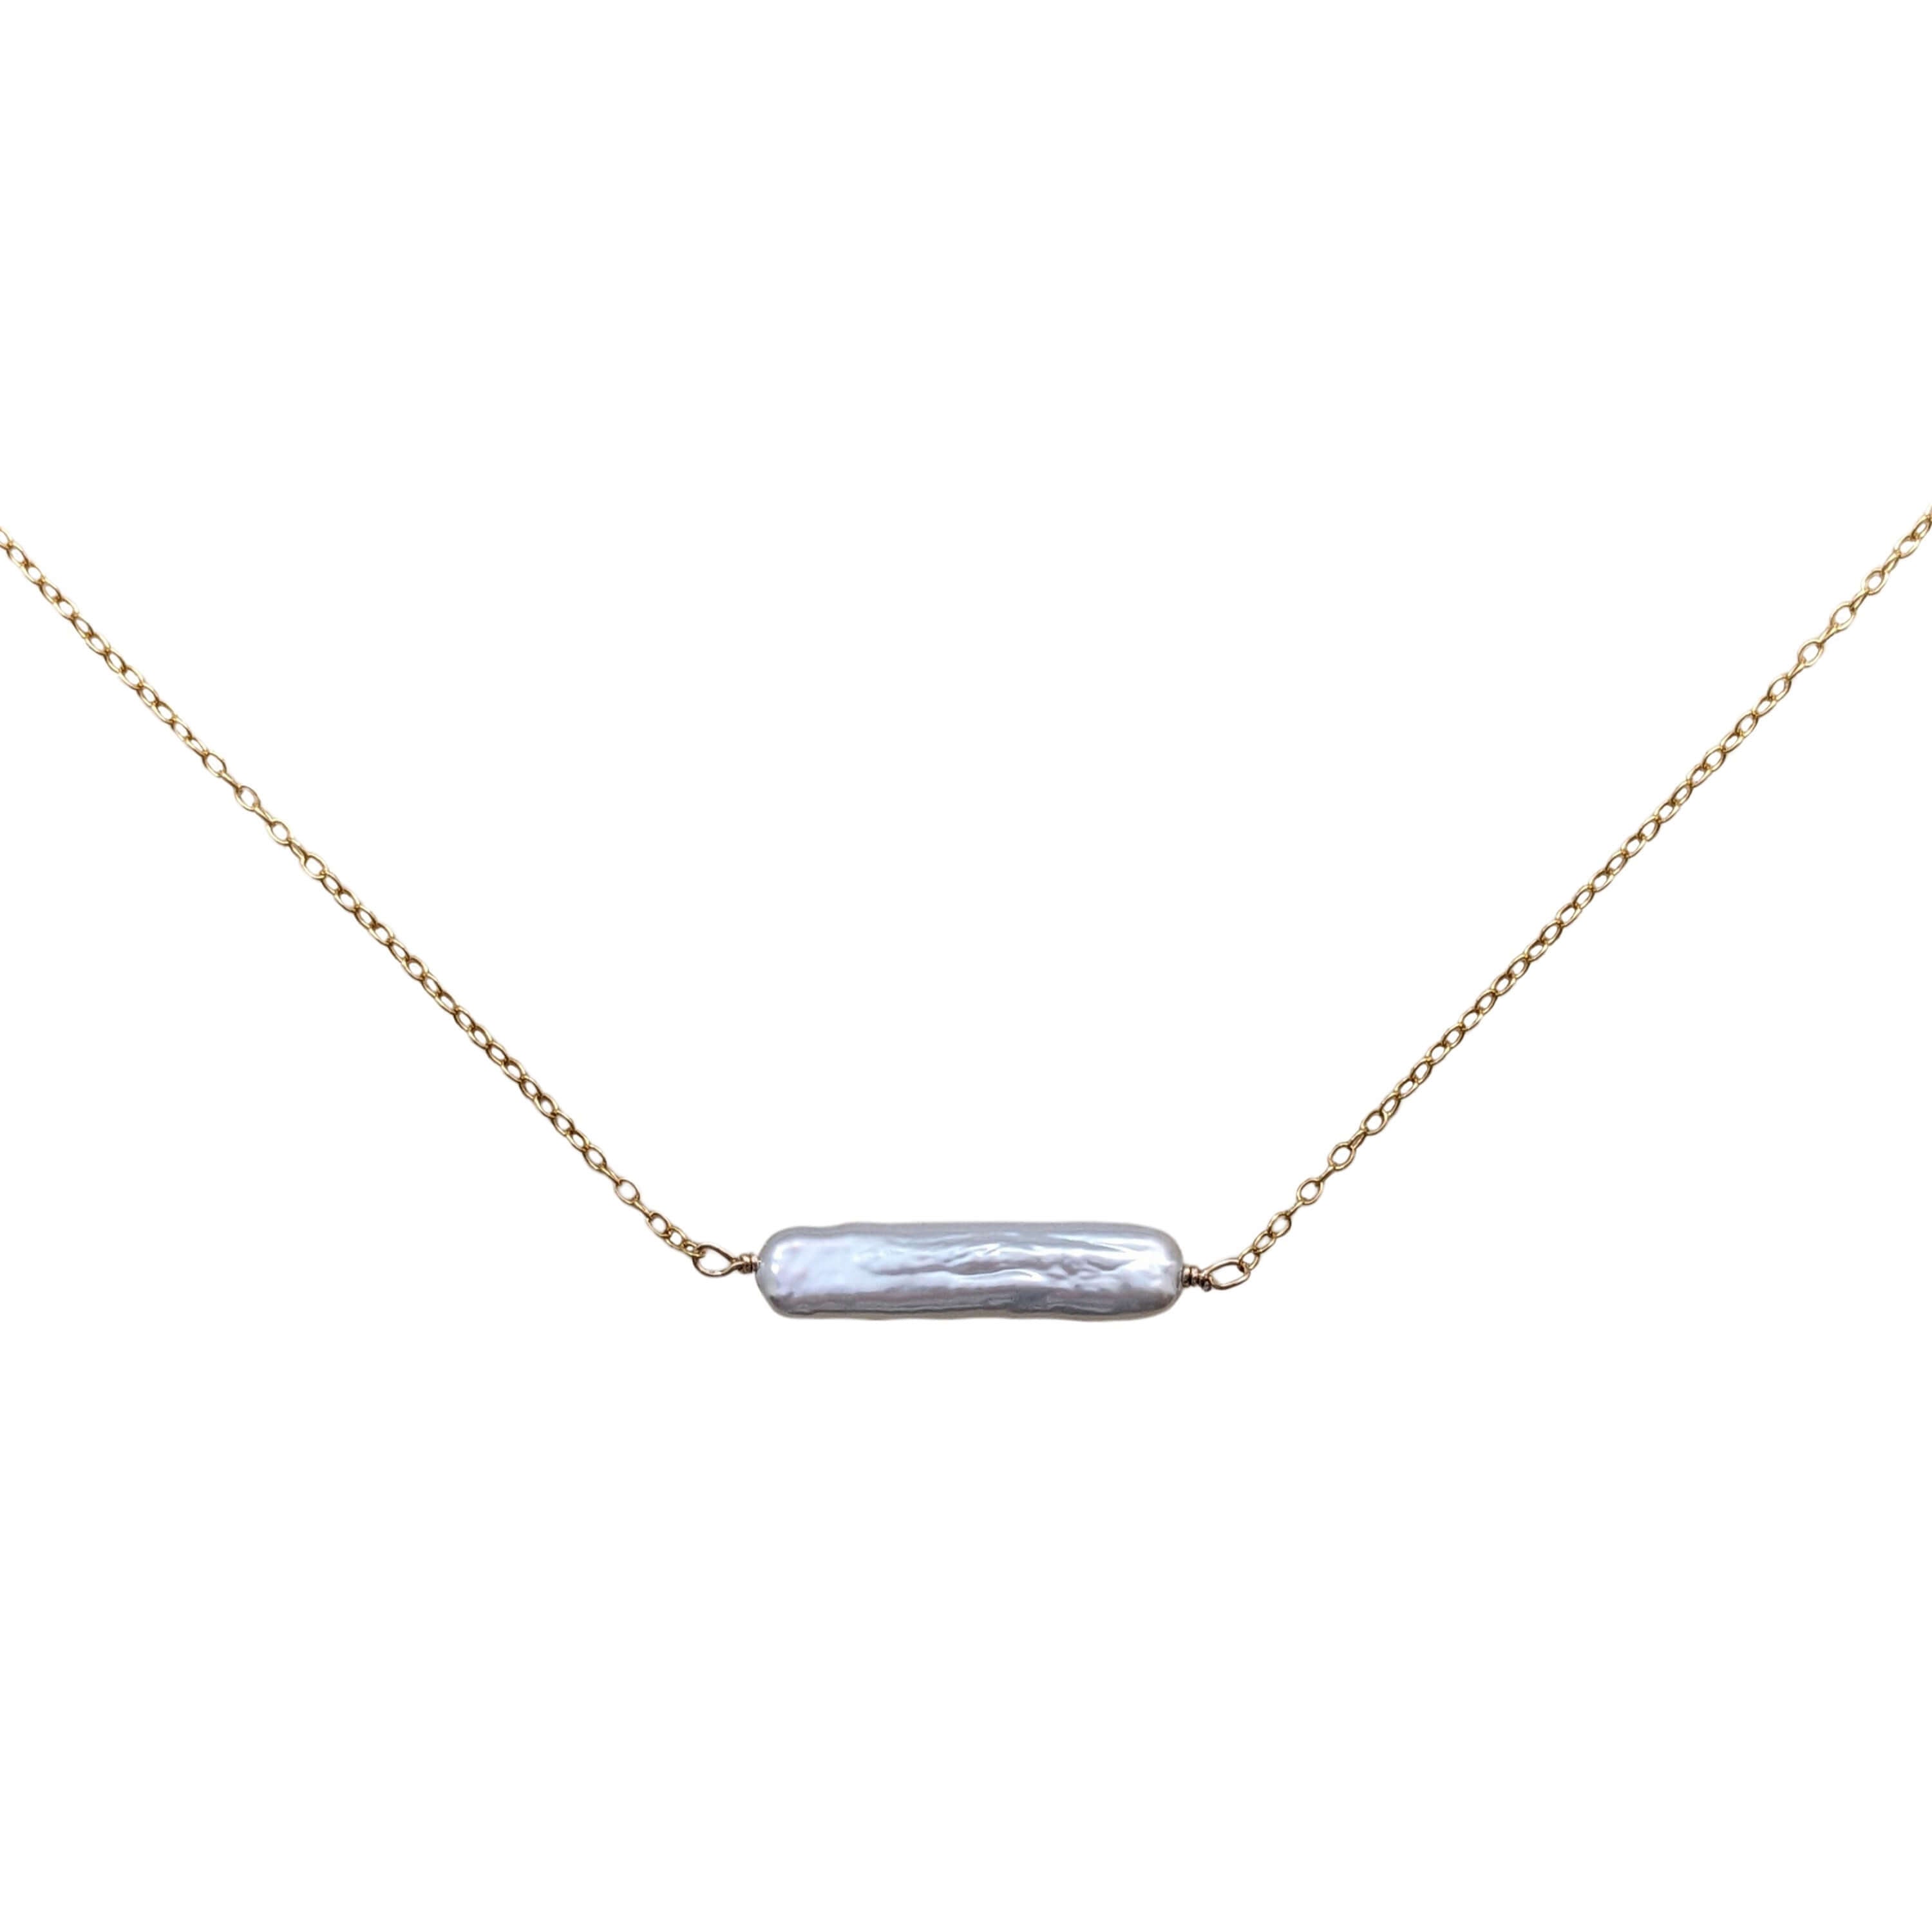 biwa pearl on a gold filled chain on a white background